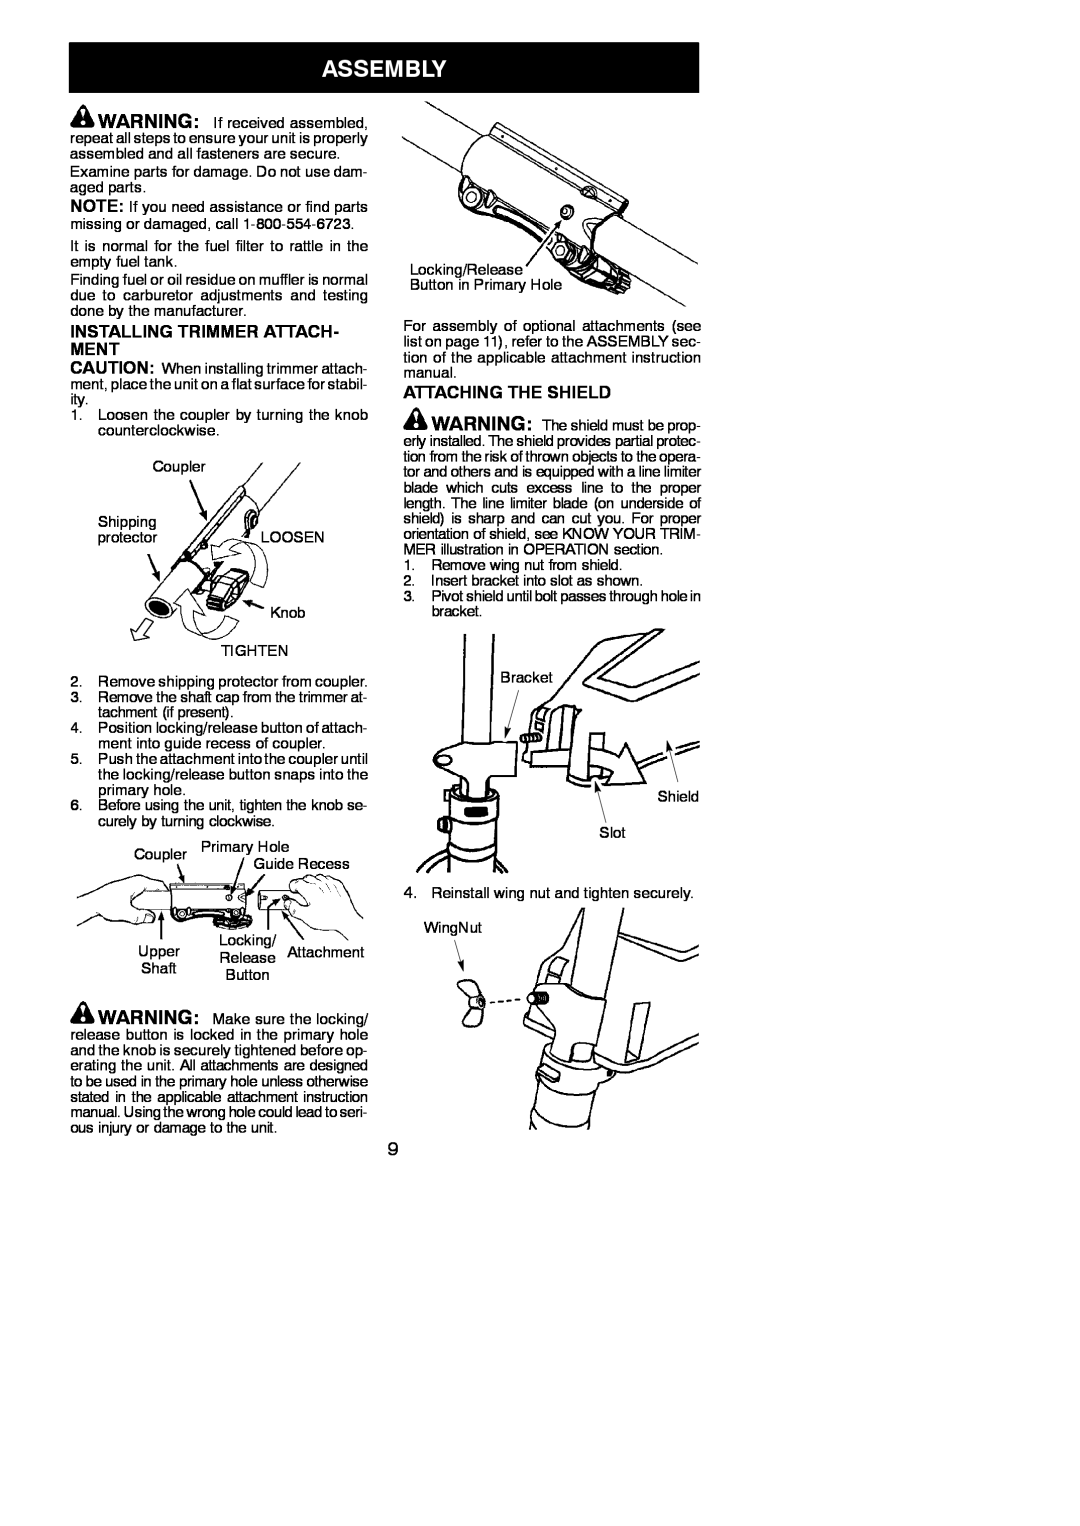 Poulan 115248826, 952711944 instruction manual Assembly, Installing Trimmer Attach- Ment, Attaching The Shield 